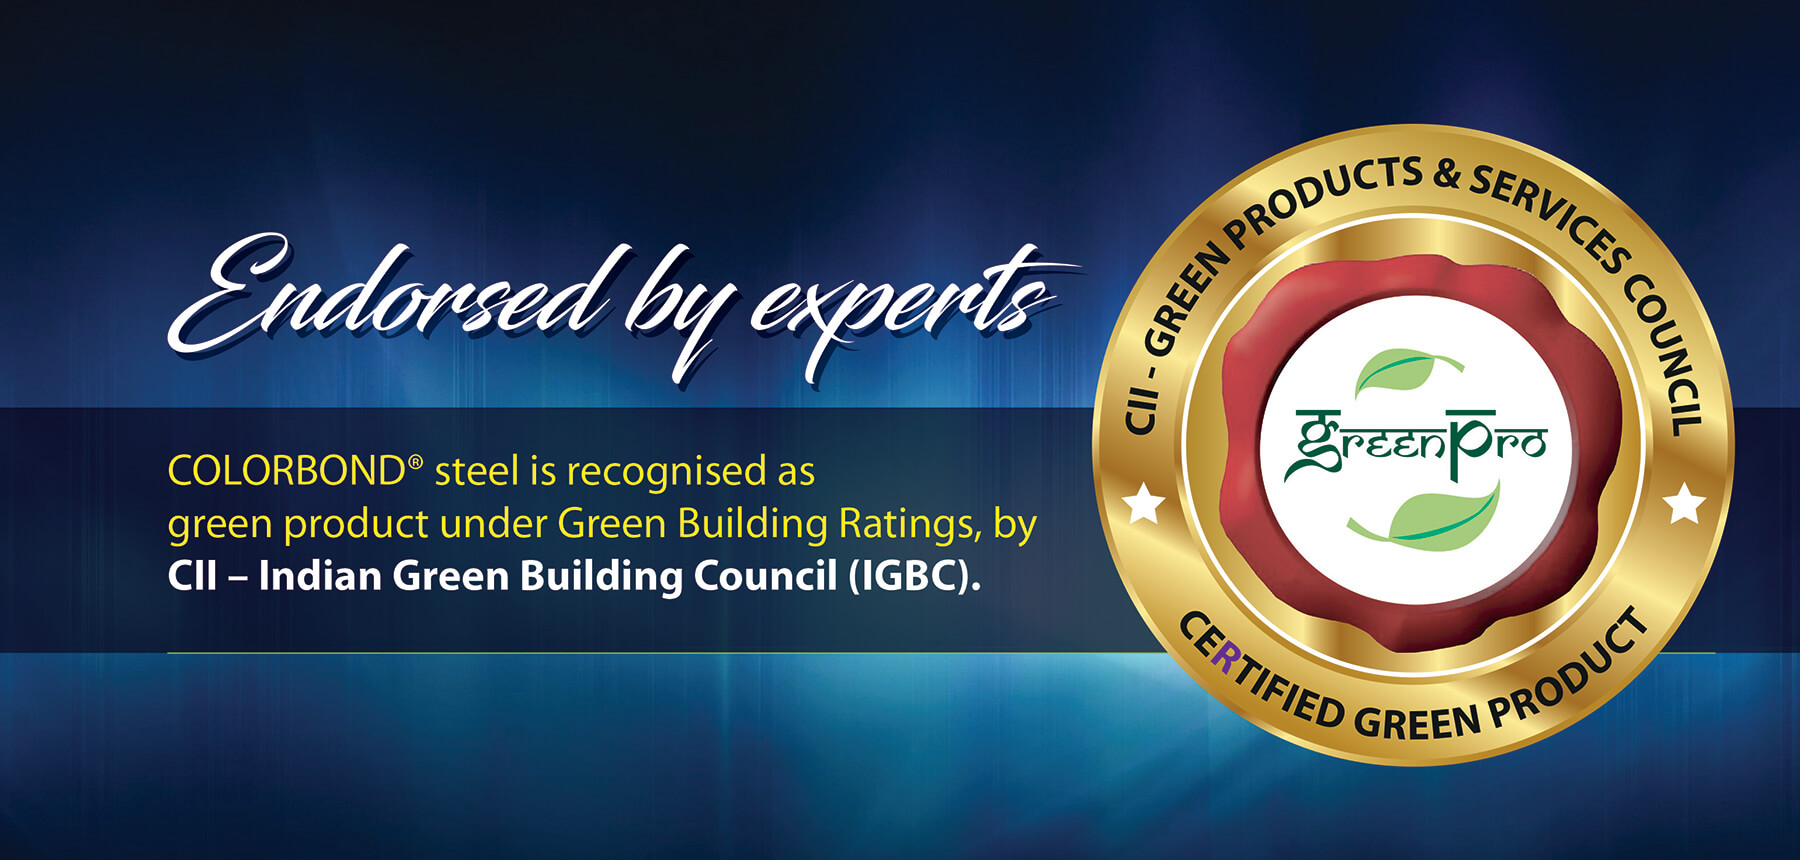 colorbond steel endorsed by experts